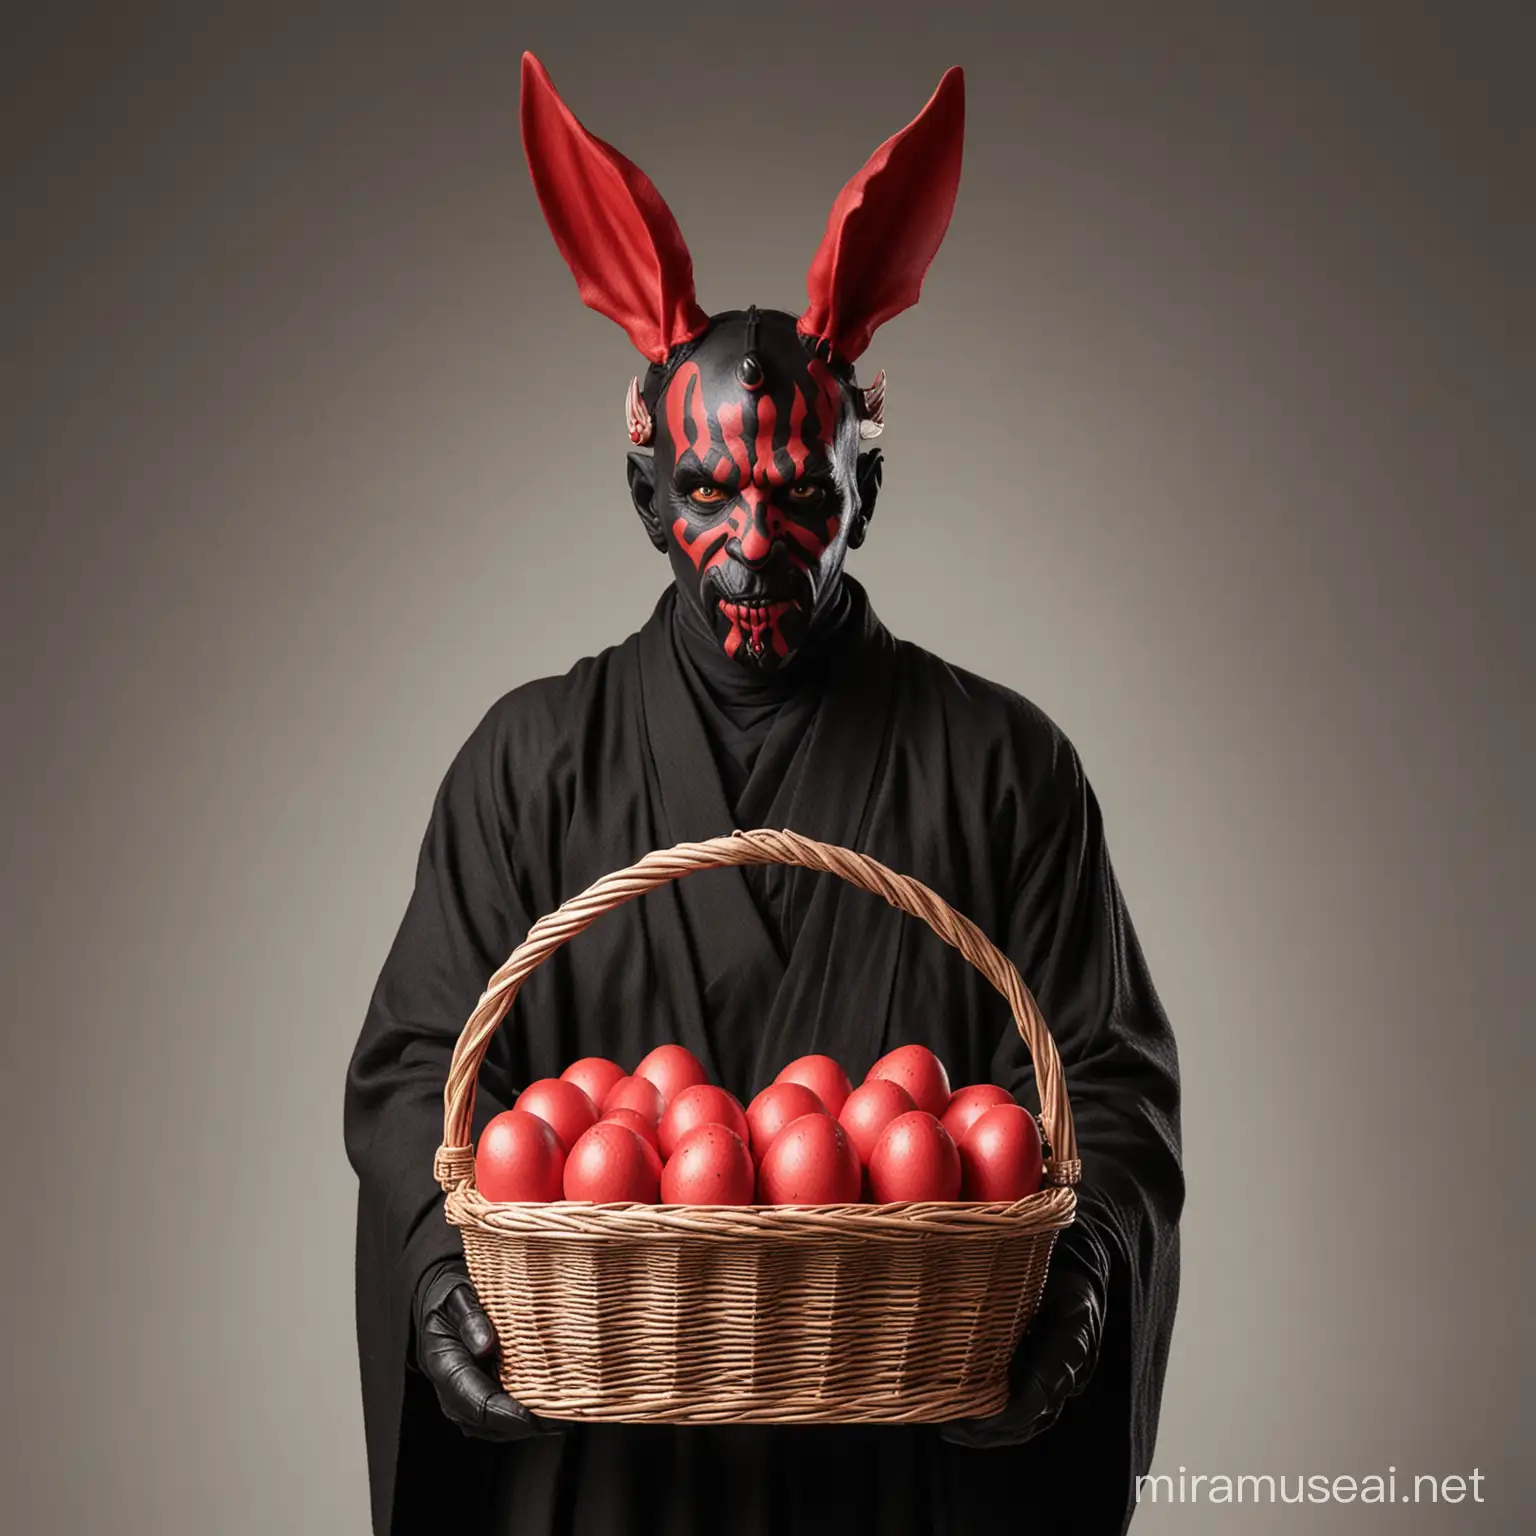 Darth Maul Easter Celebration Sith Lord with Bunny Ears and Red Egg Basket